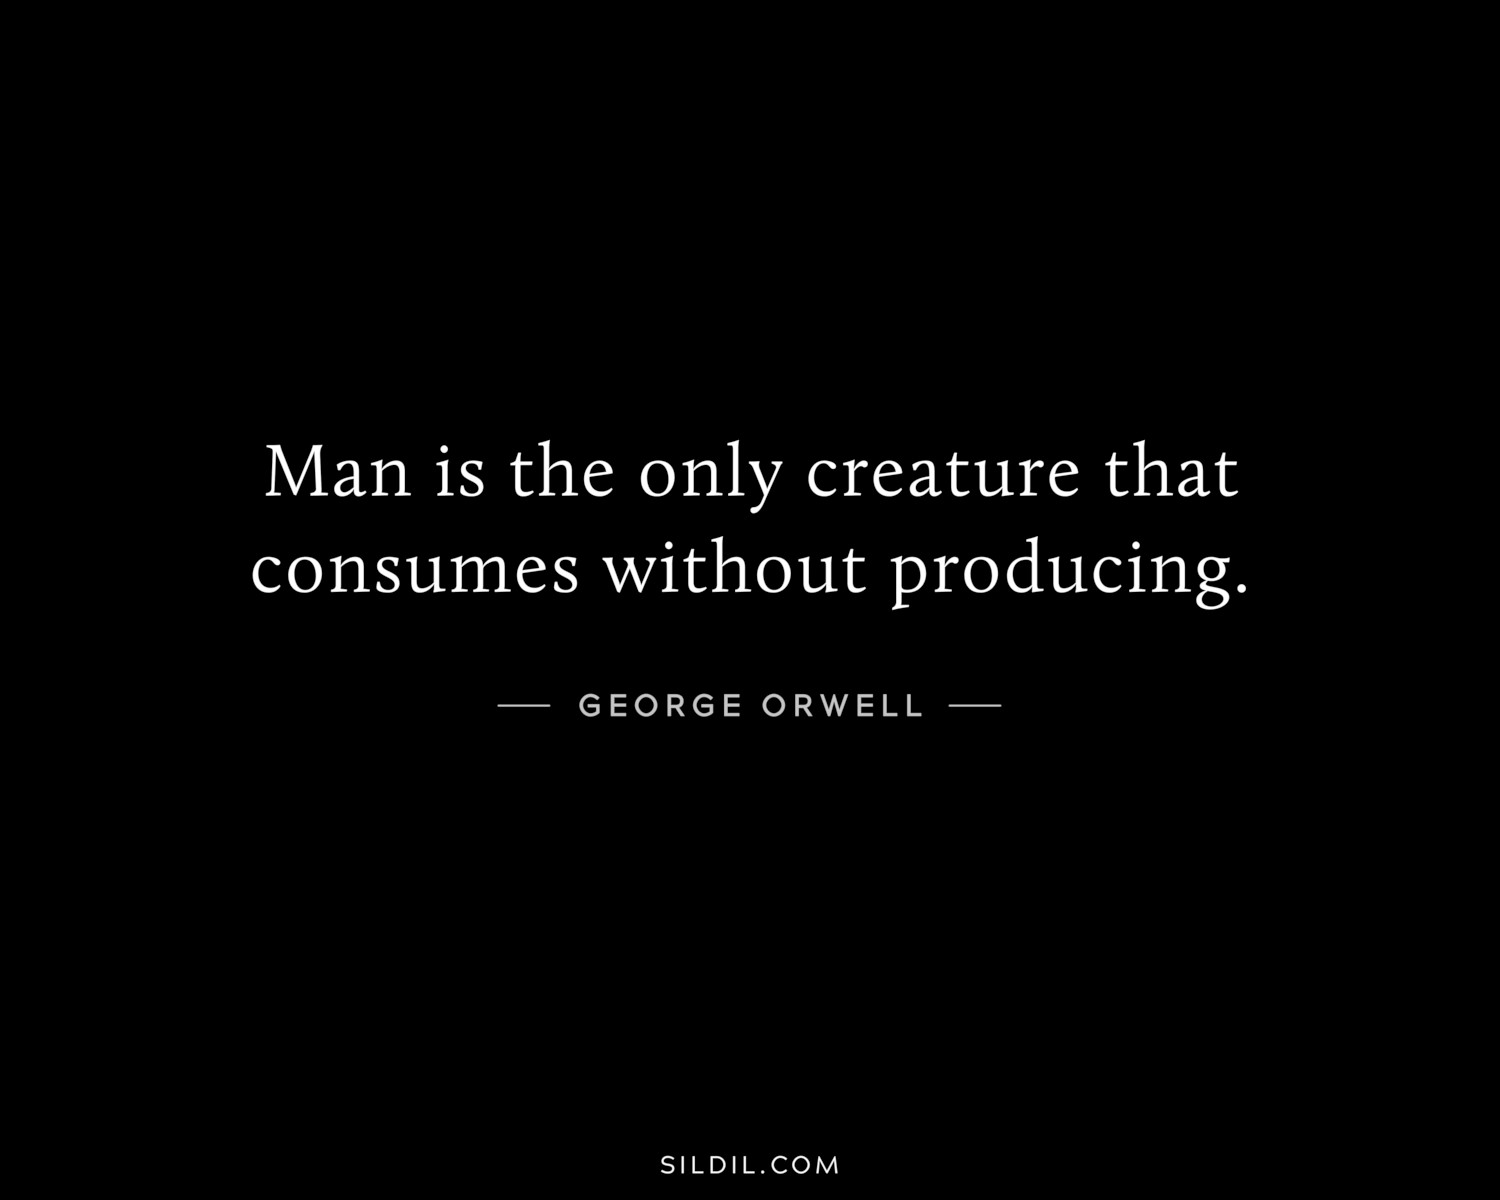 Man is the only creature that consumes without producing.